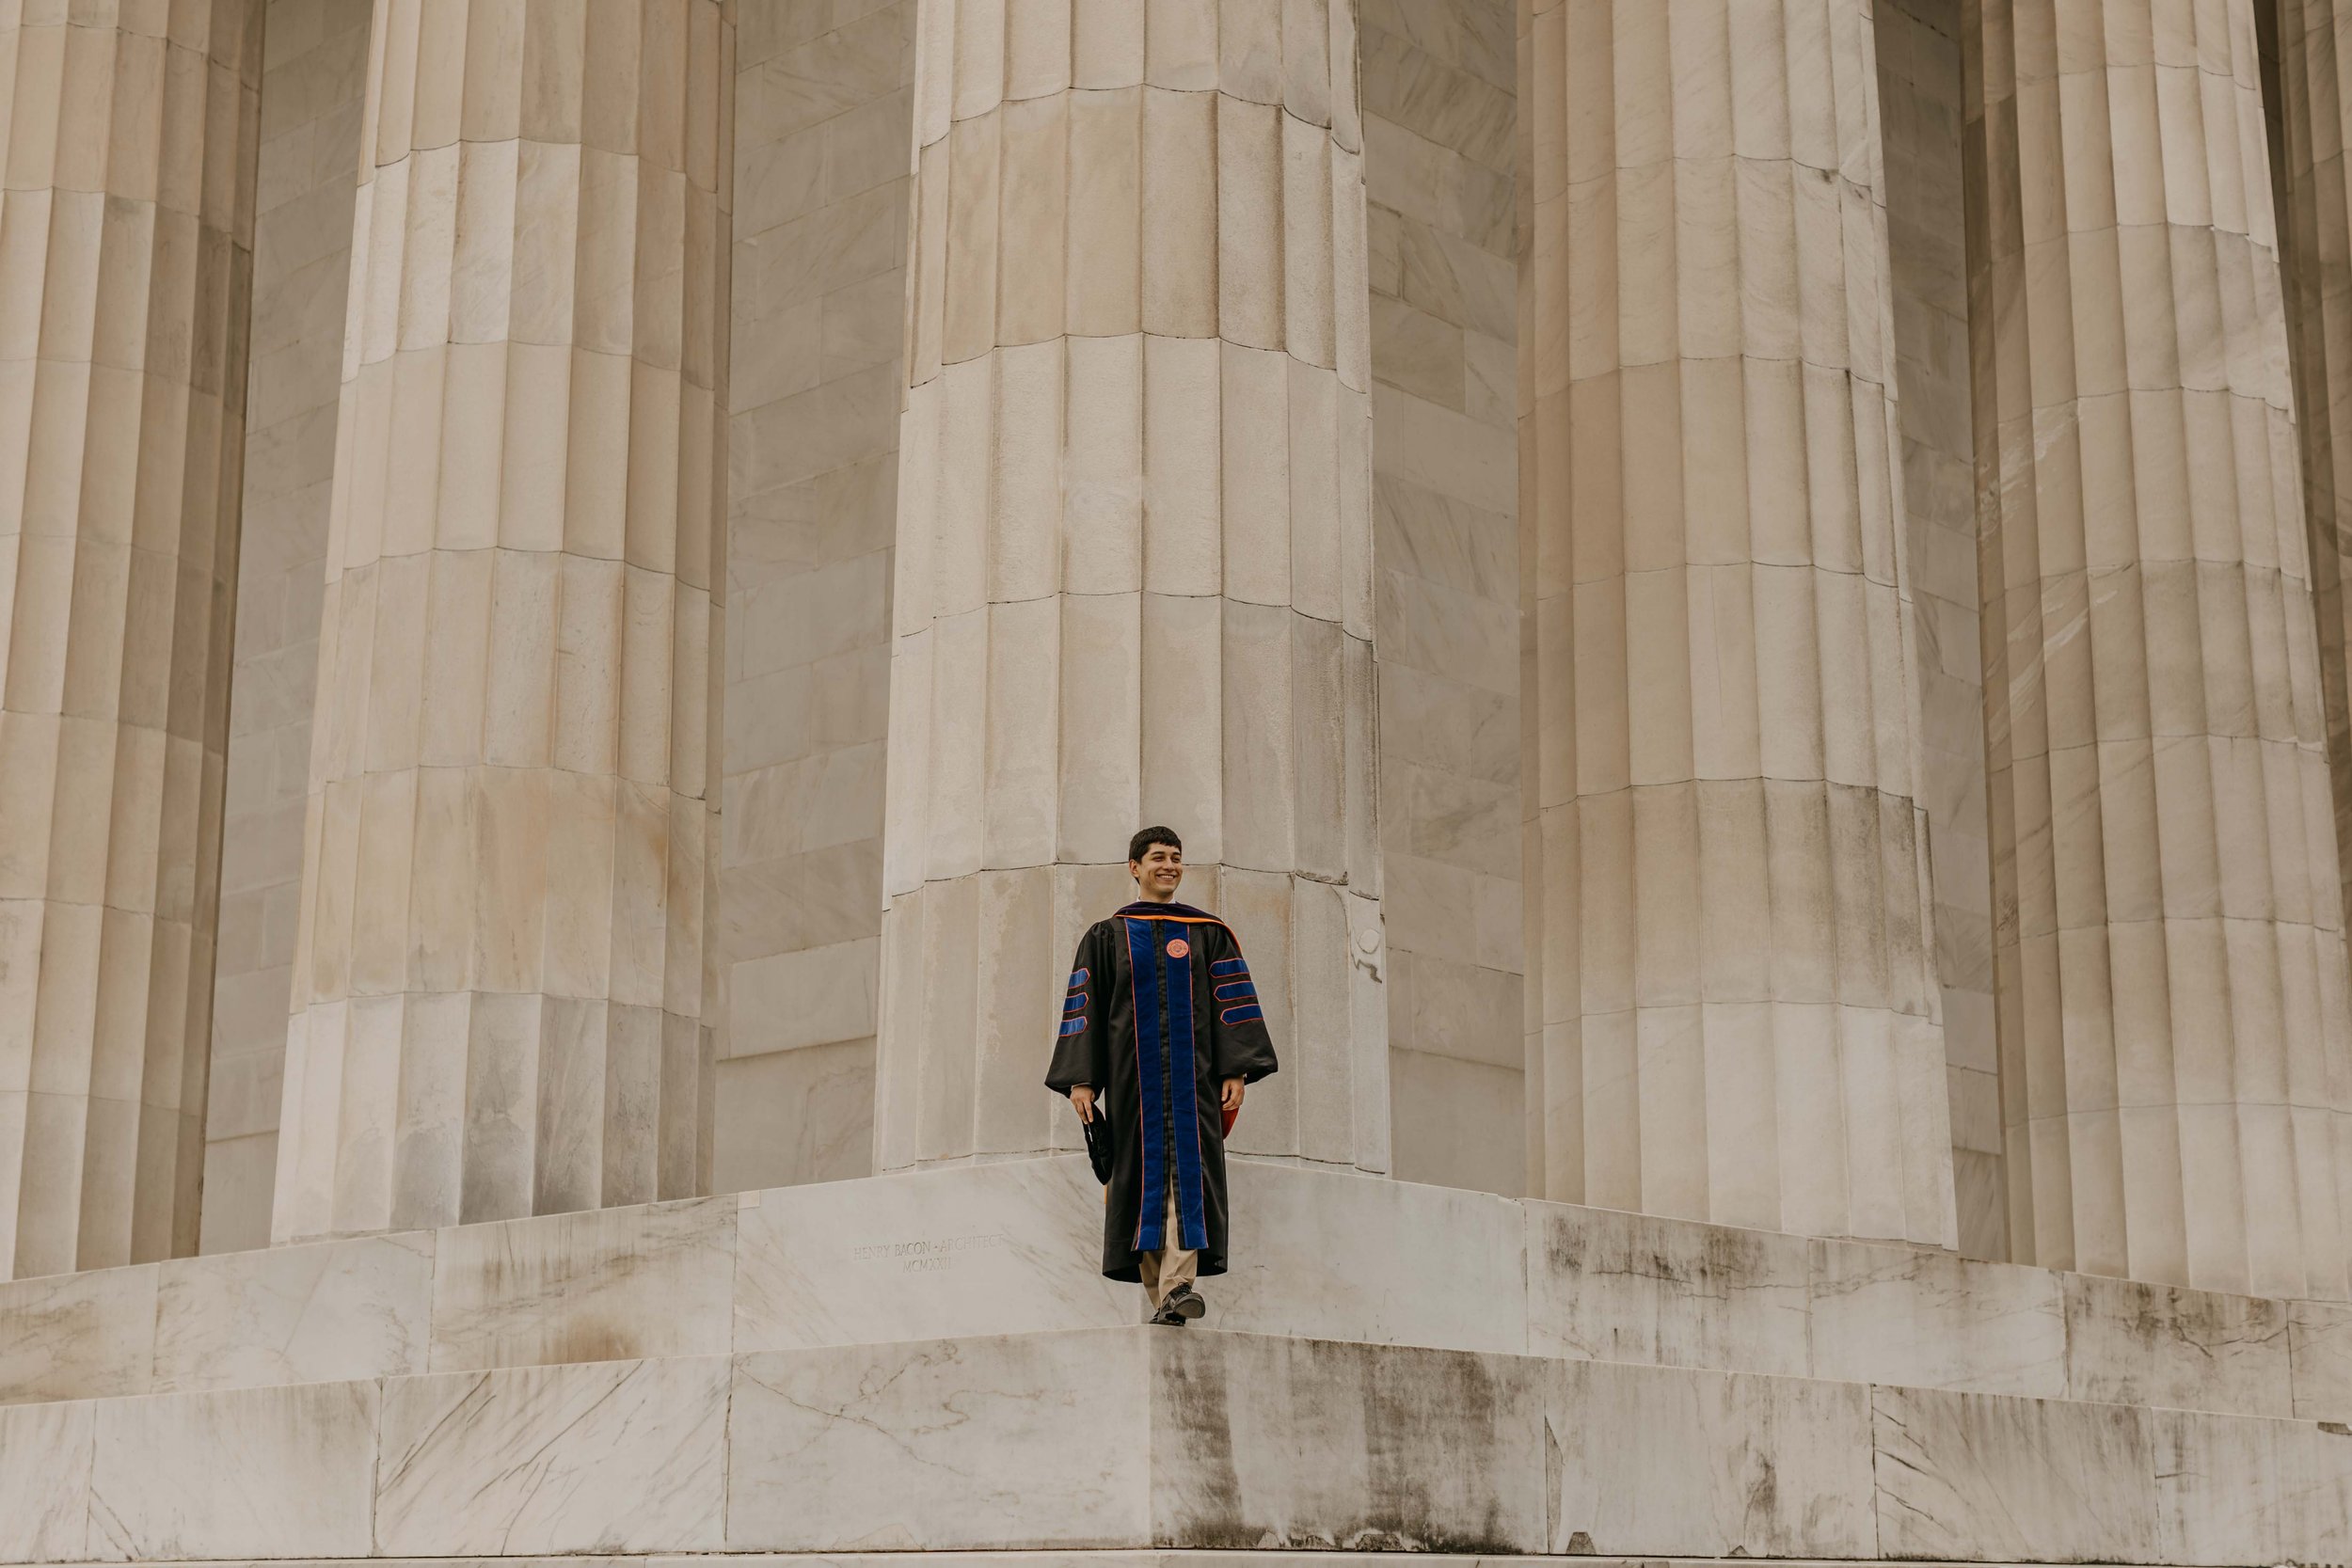 A law student's senior graduation photos at the Lincoln Memorial in Washington DC